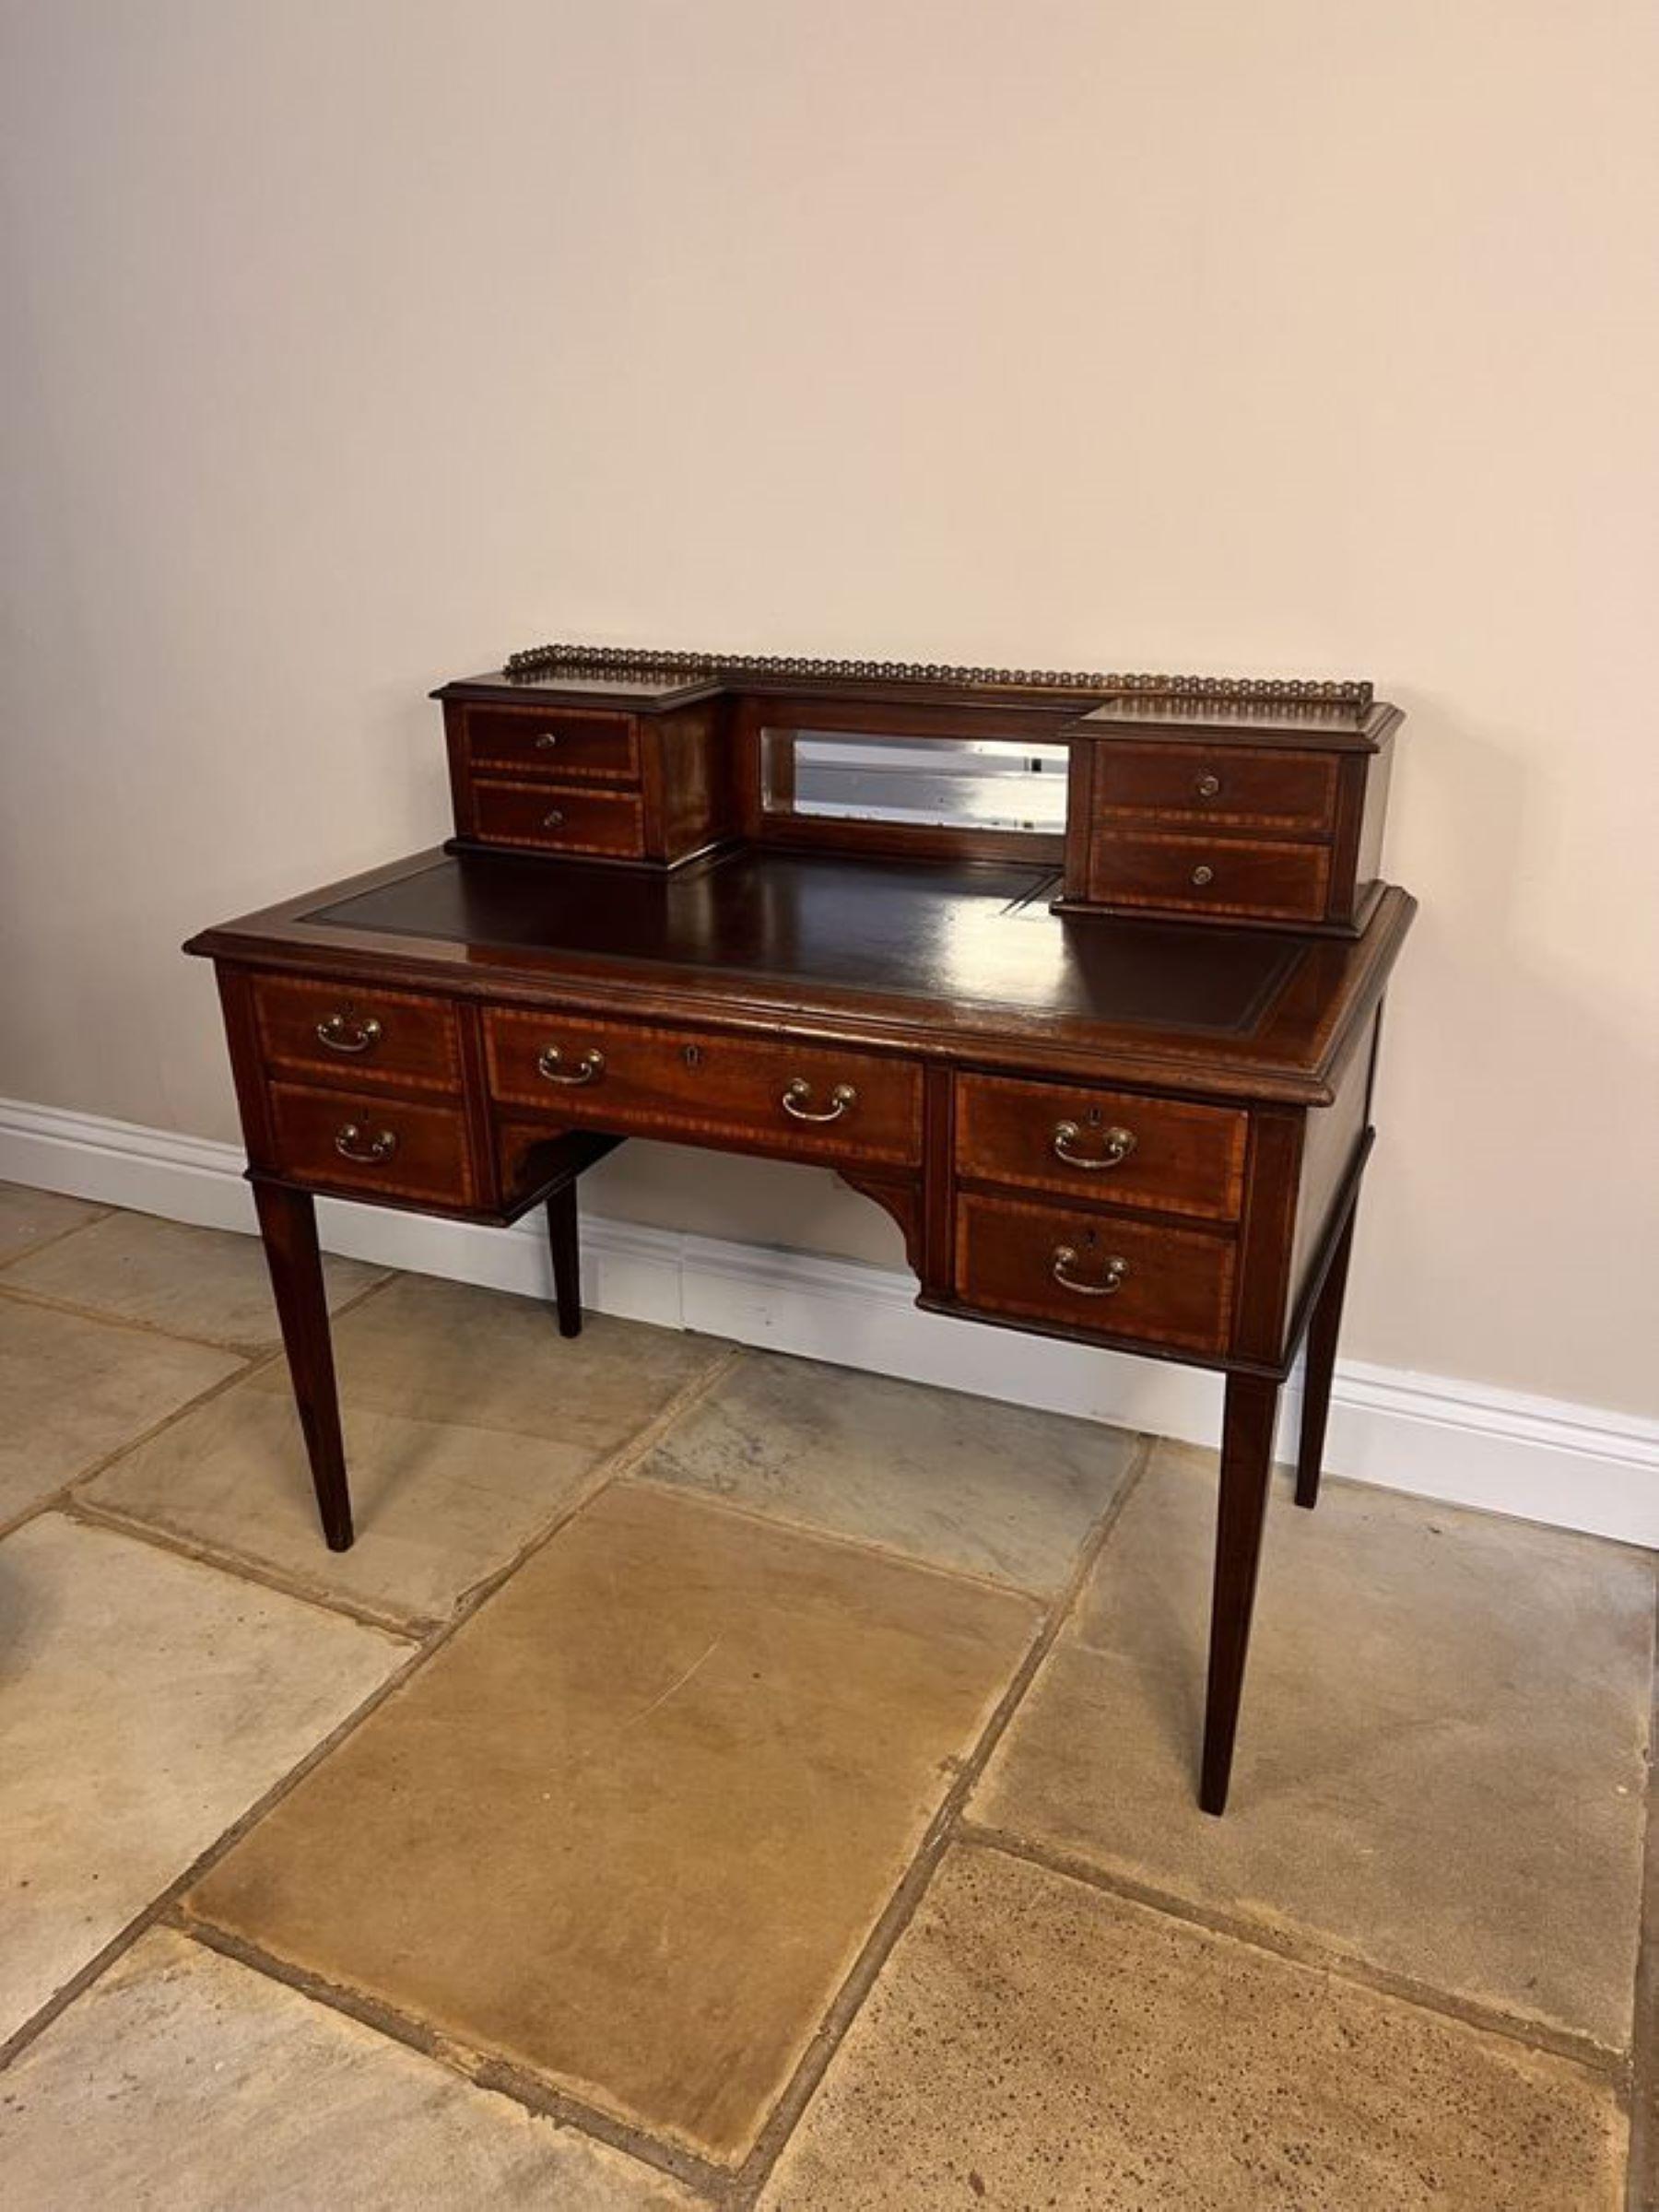 Antique Edwardian quality mahogany inlaid writing desk, having the original brass gilded gallery above a small bevelled edge mirror flanked by four small mahogany inlaid drawers above a leather top writing surface cross banded in mahogany above five